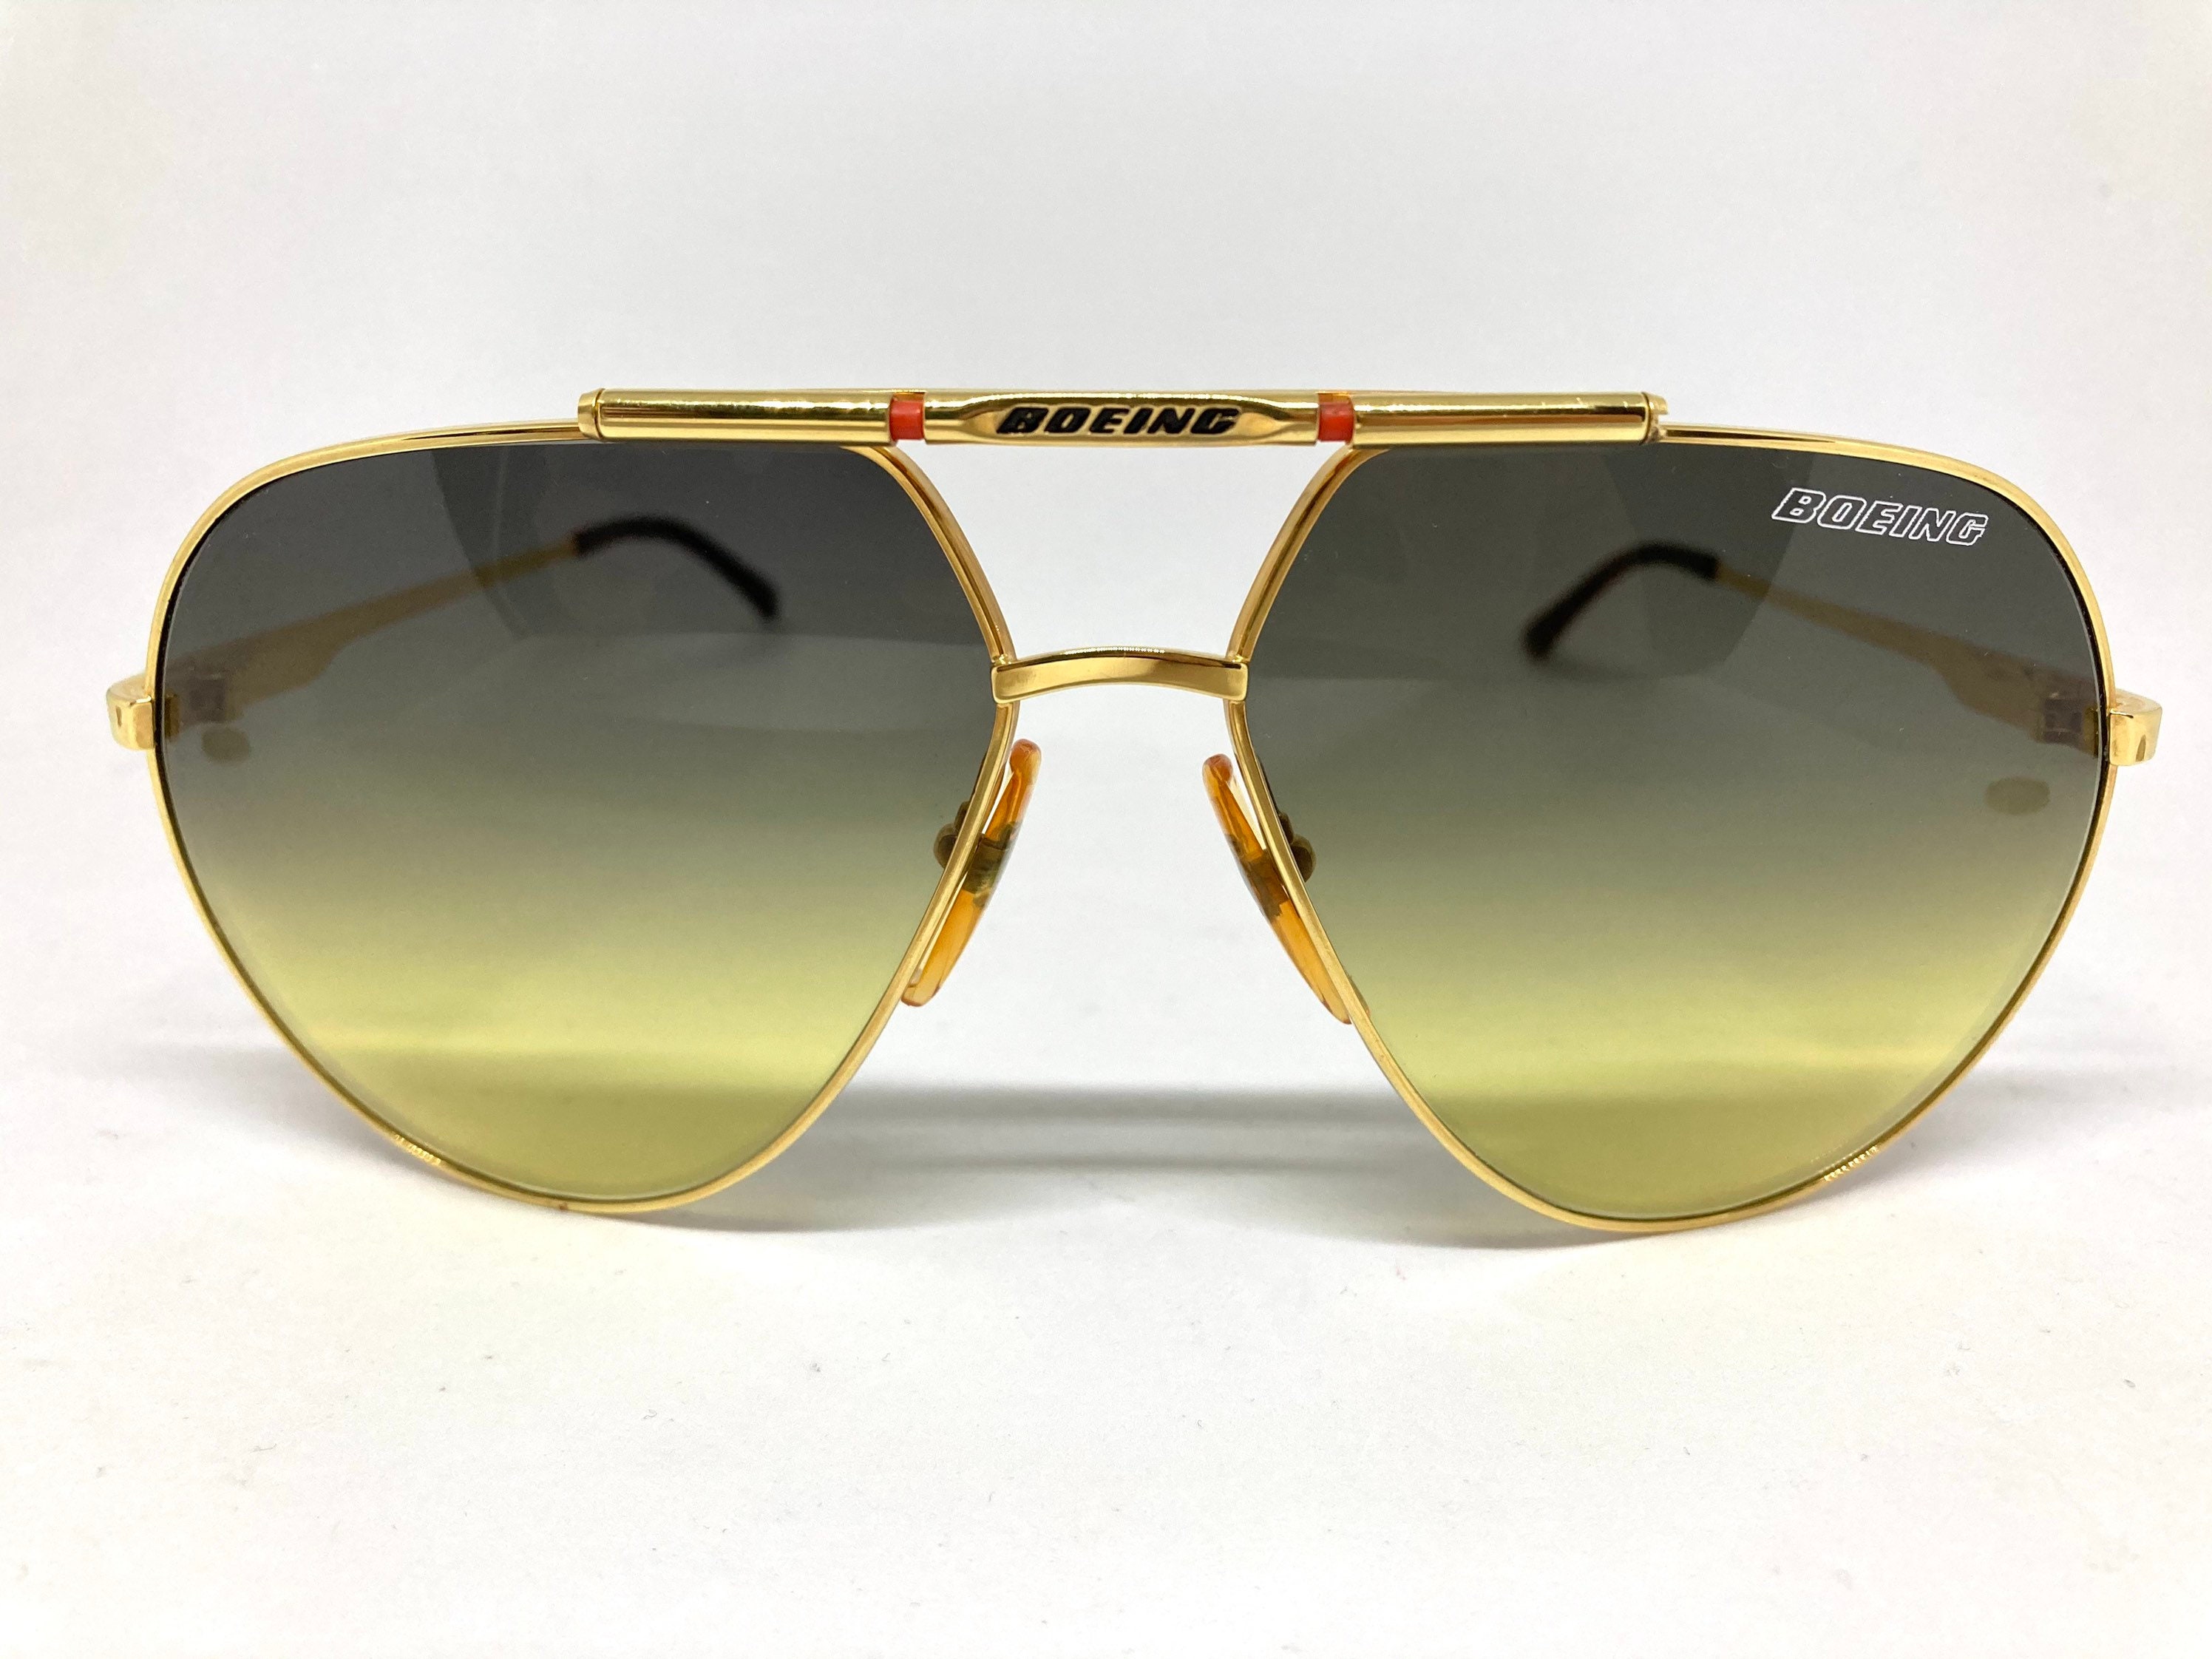 Carrera Vintage Boeing Collection By Carrera 5708 Lunettes de Soleil W.Germany 80's 